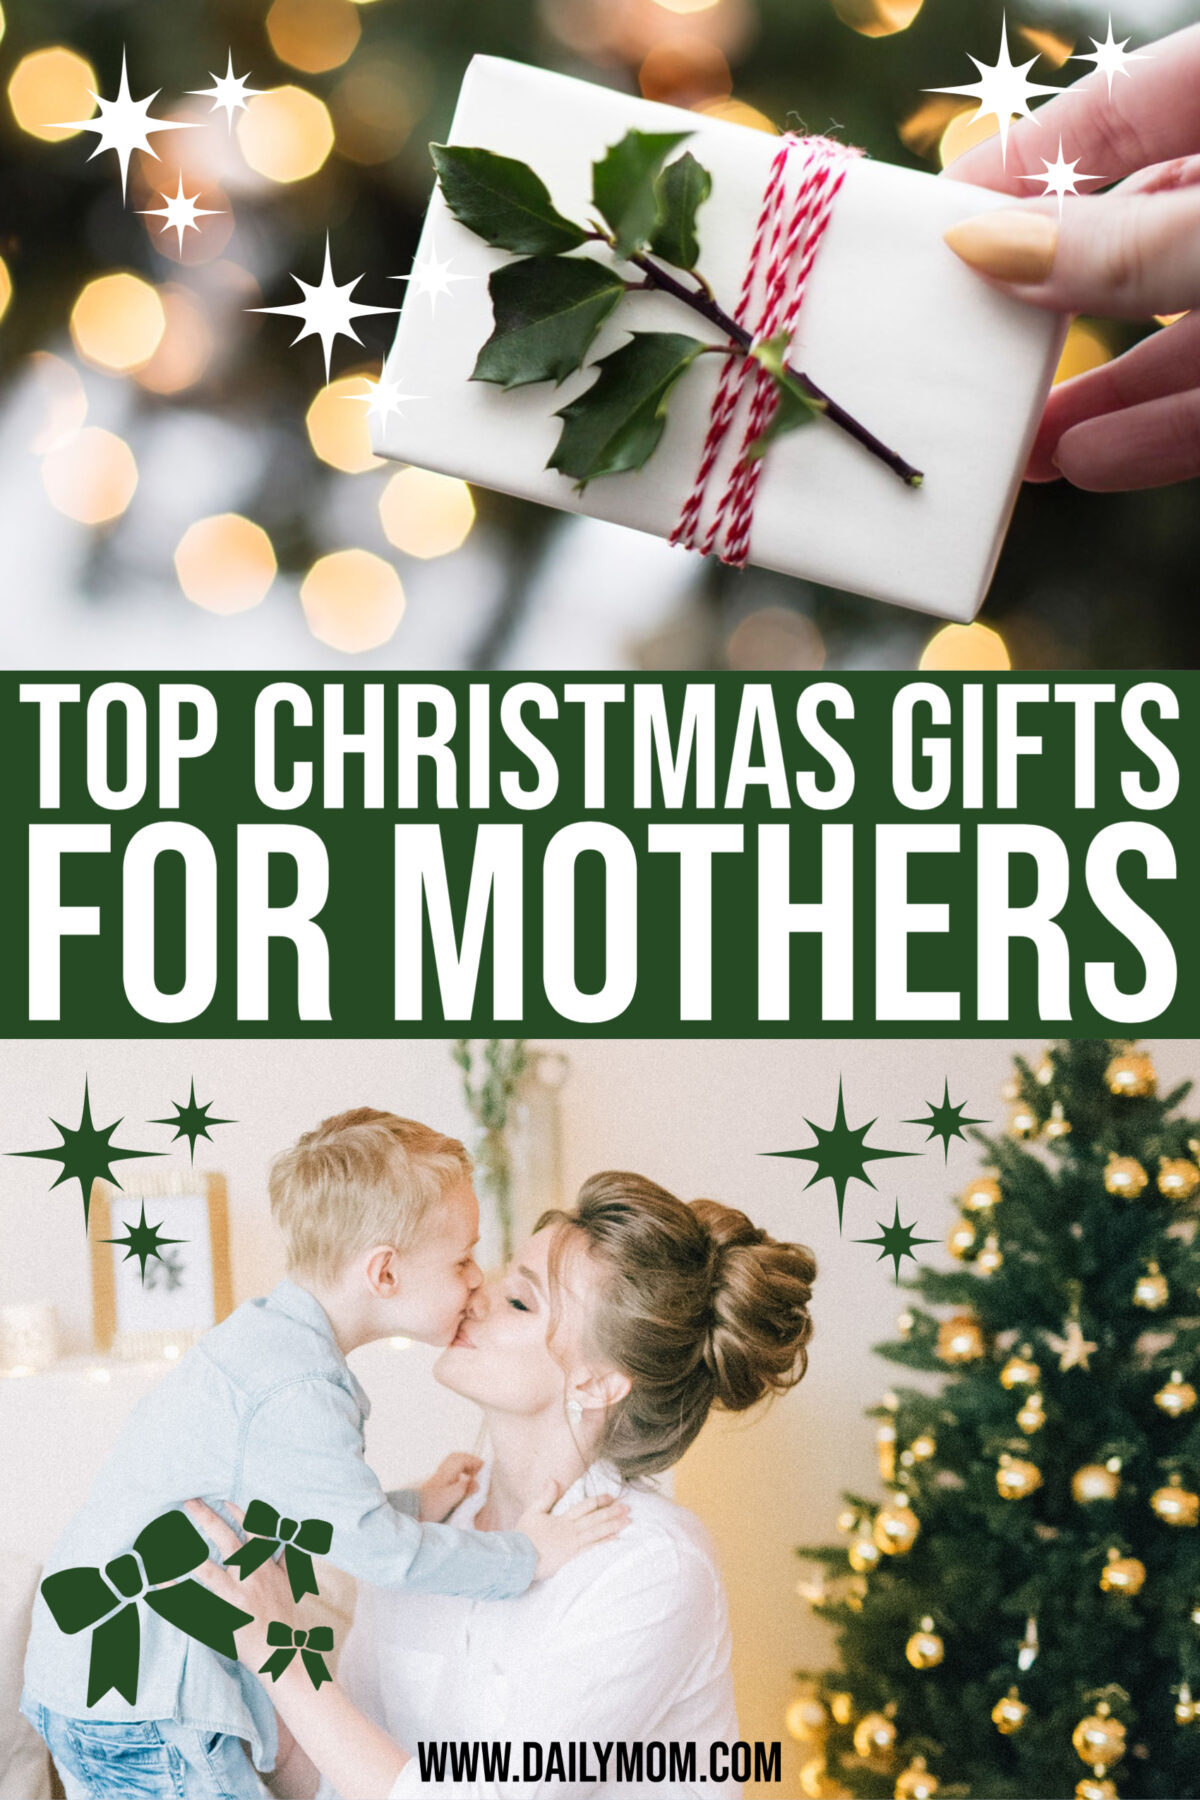 The Top 26 Christmas Gifts For Mothers {2020}